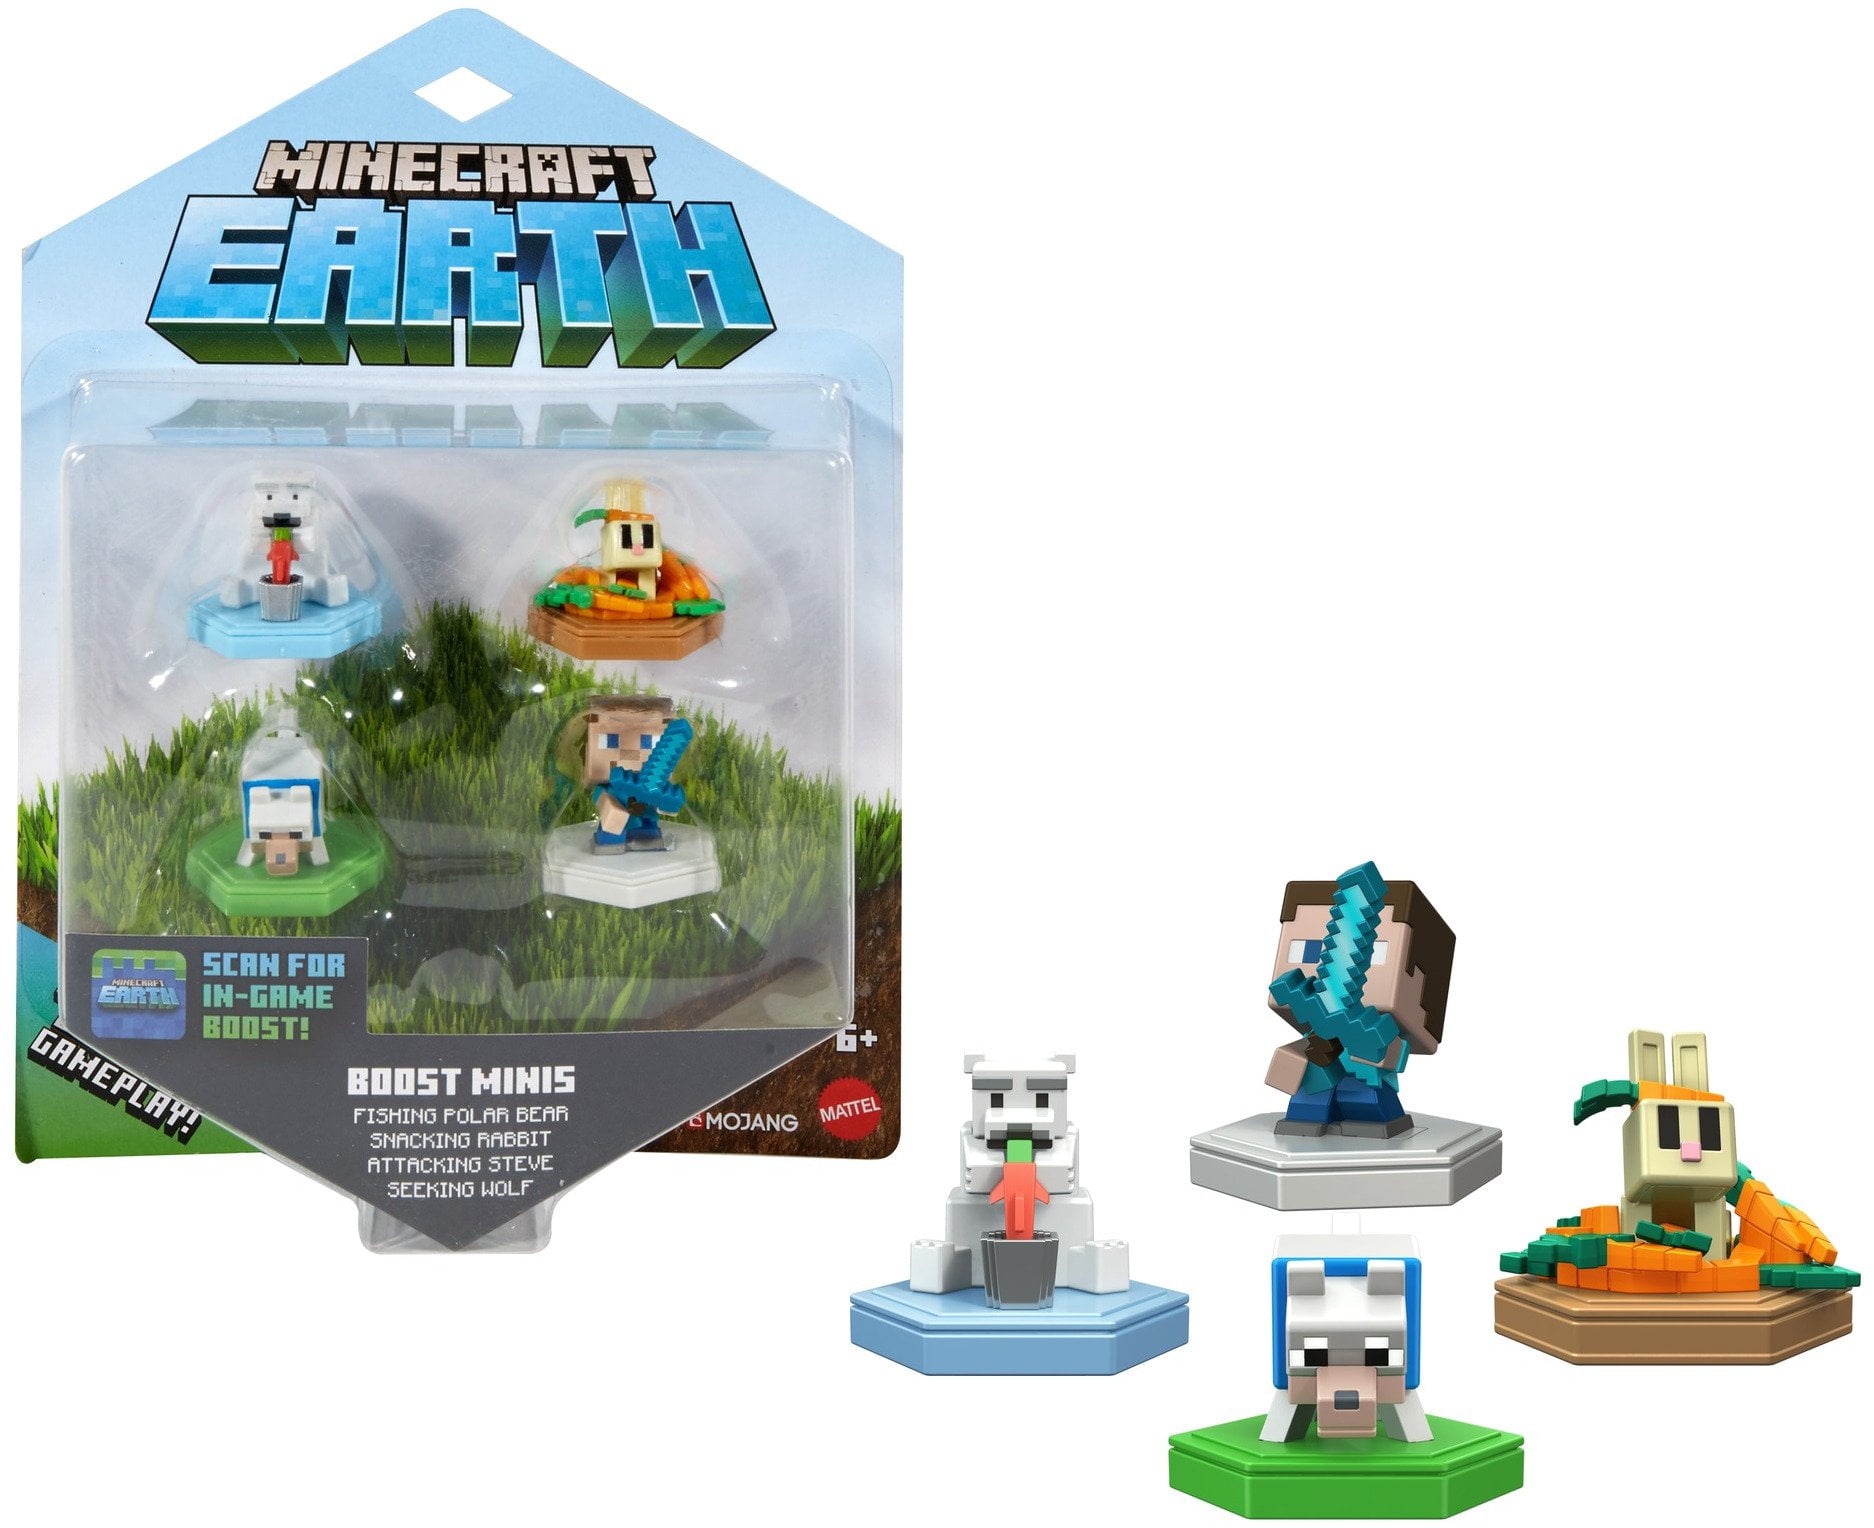 Minecraft The End Arena - A2Z Science & Learning Toy Store